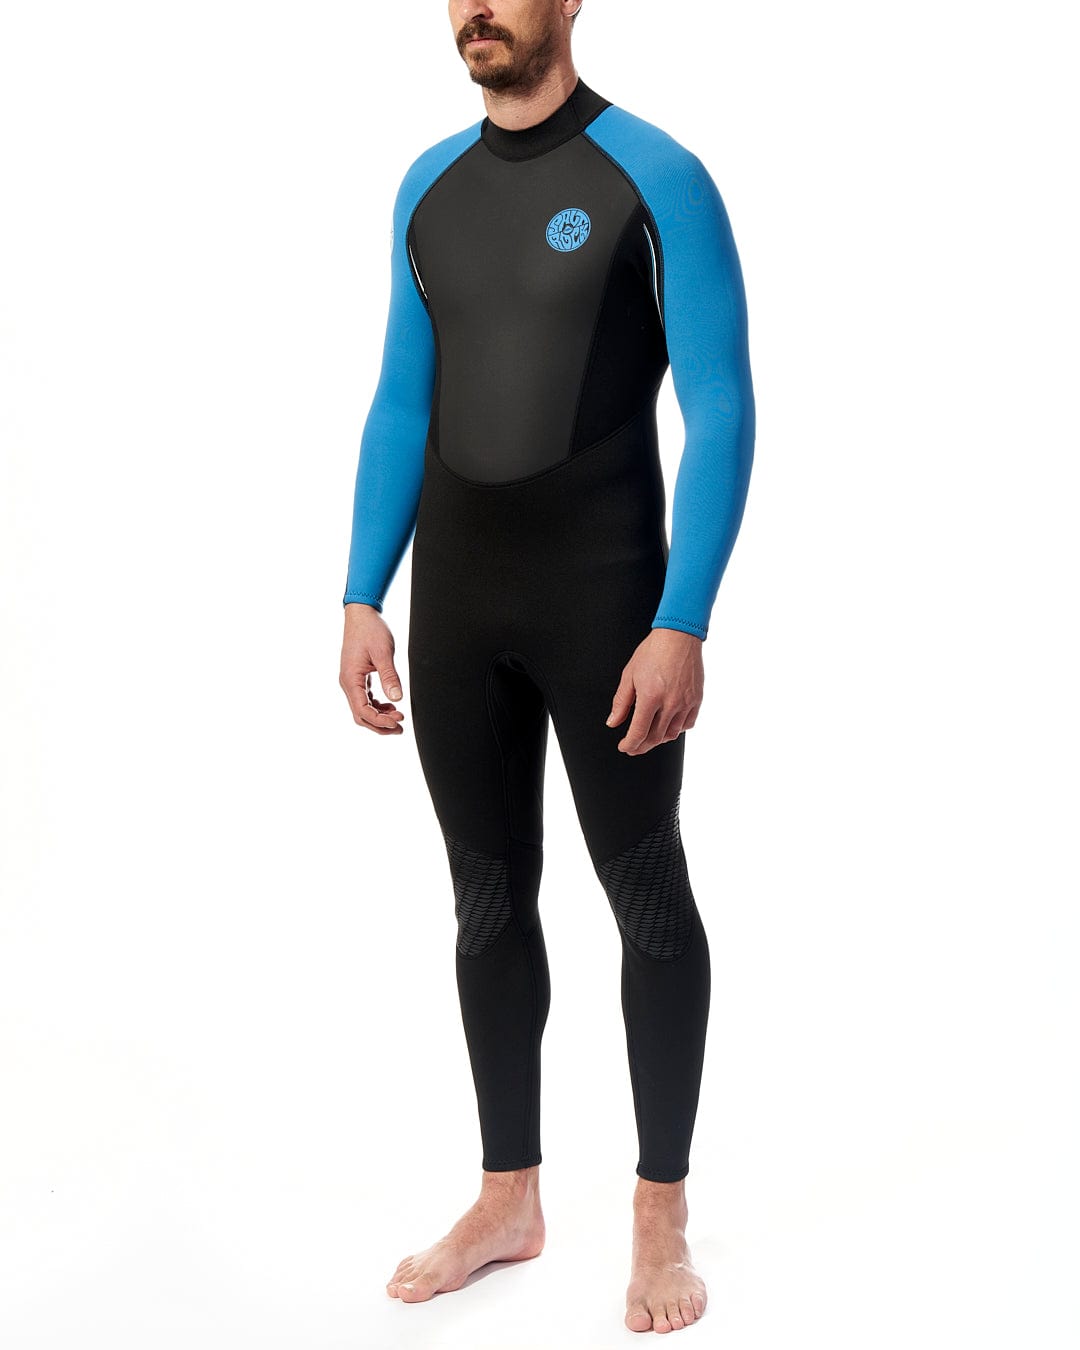 A man in a Saltrock Core - Mens 3/2 Full Wetsuit - Blue/Black standing on a white background.